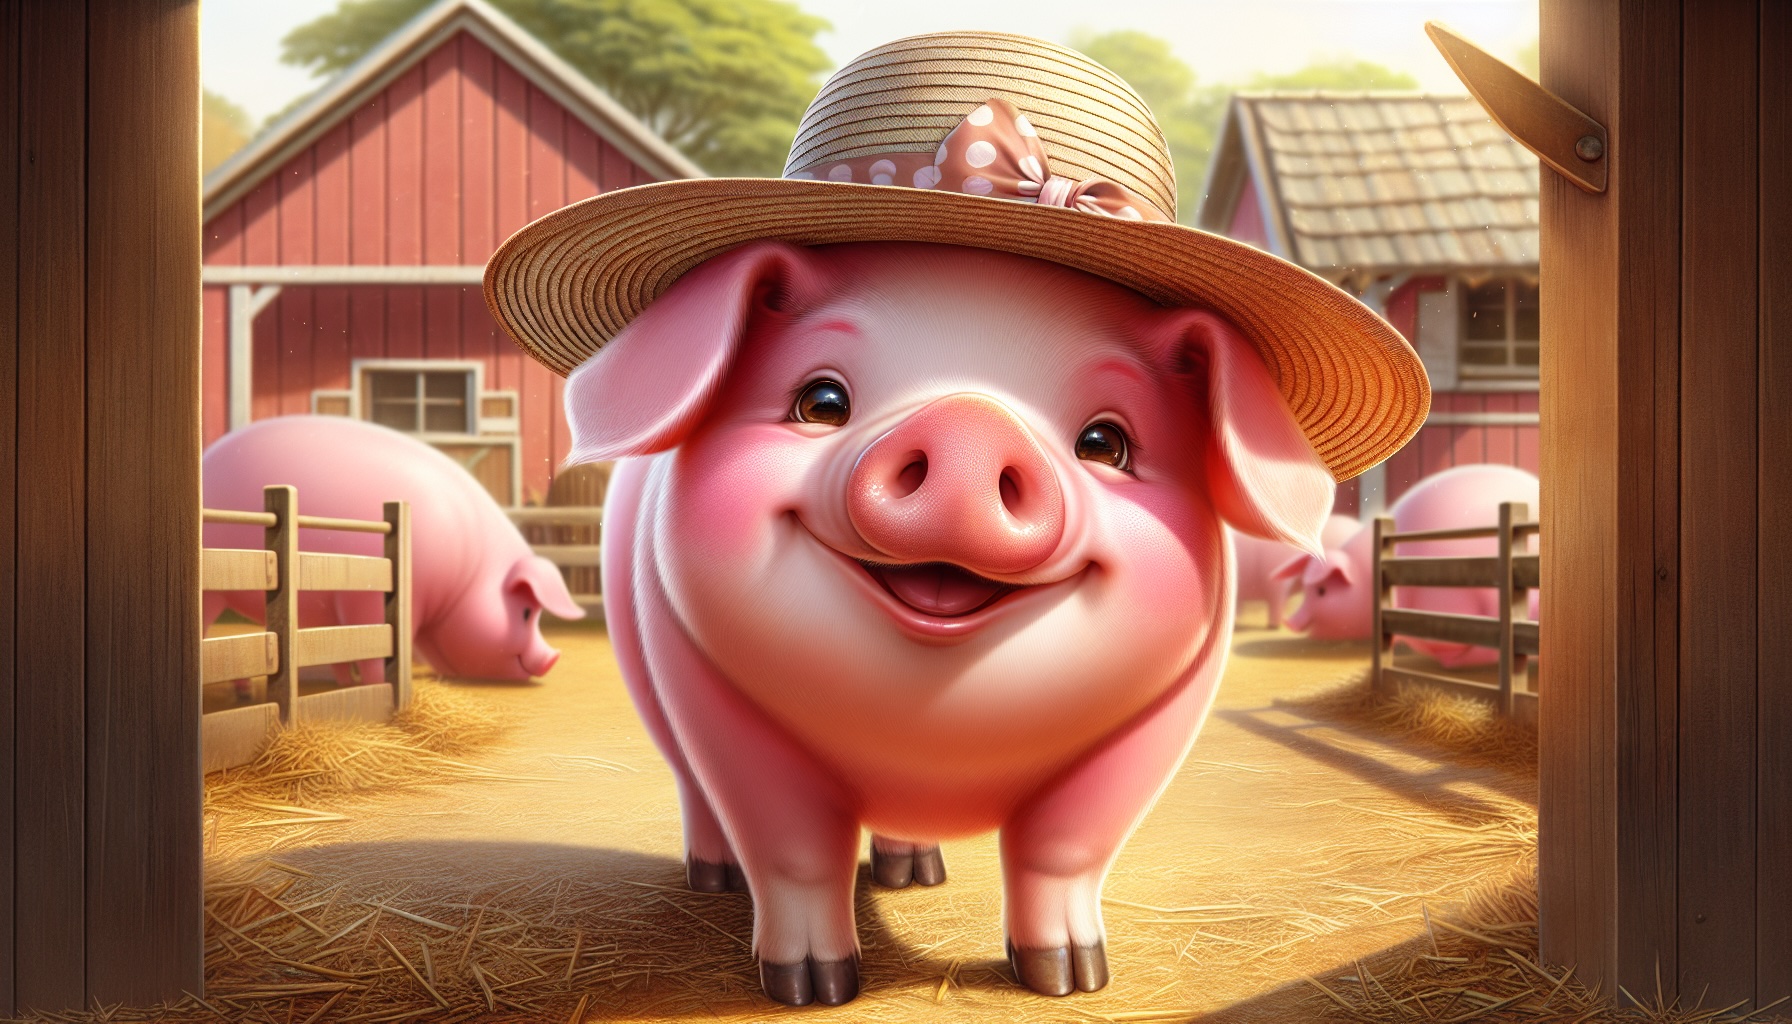 An image of a pig wearing a hat, generated by API call.